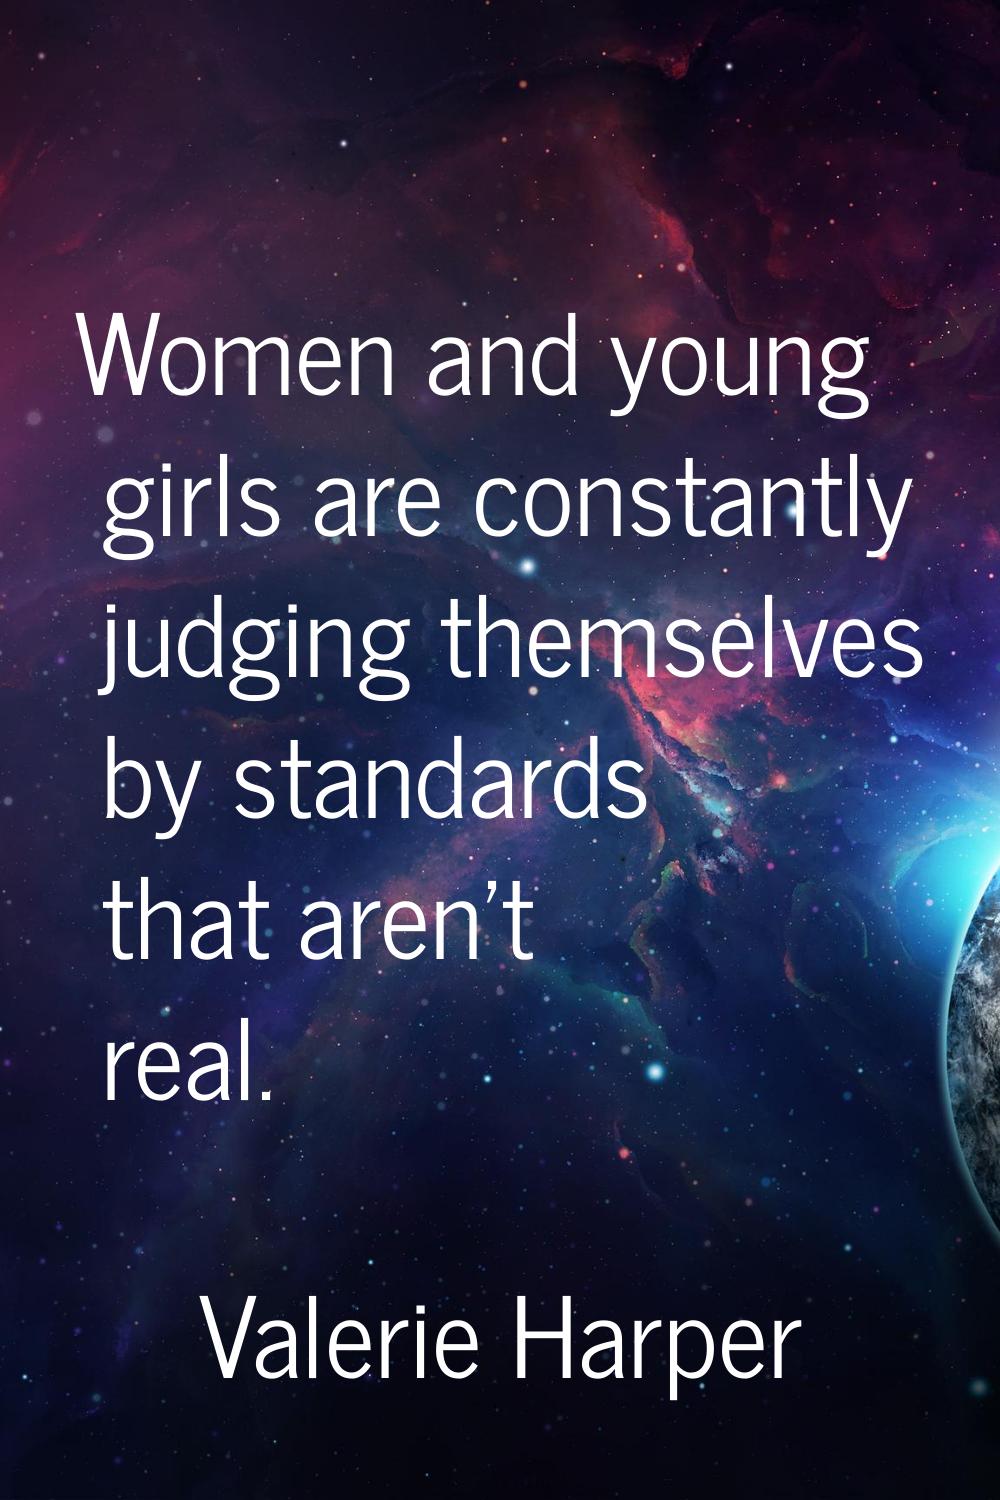 Women and young girls are constantly judging themselves by standards that aren't real.